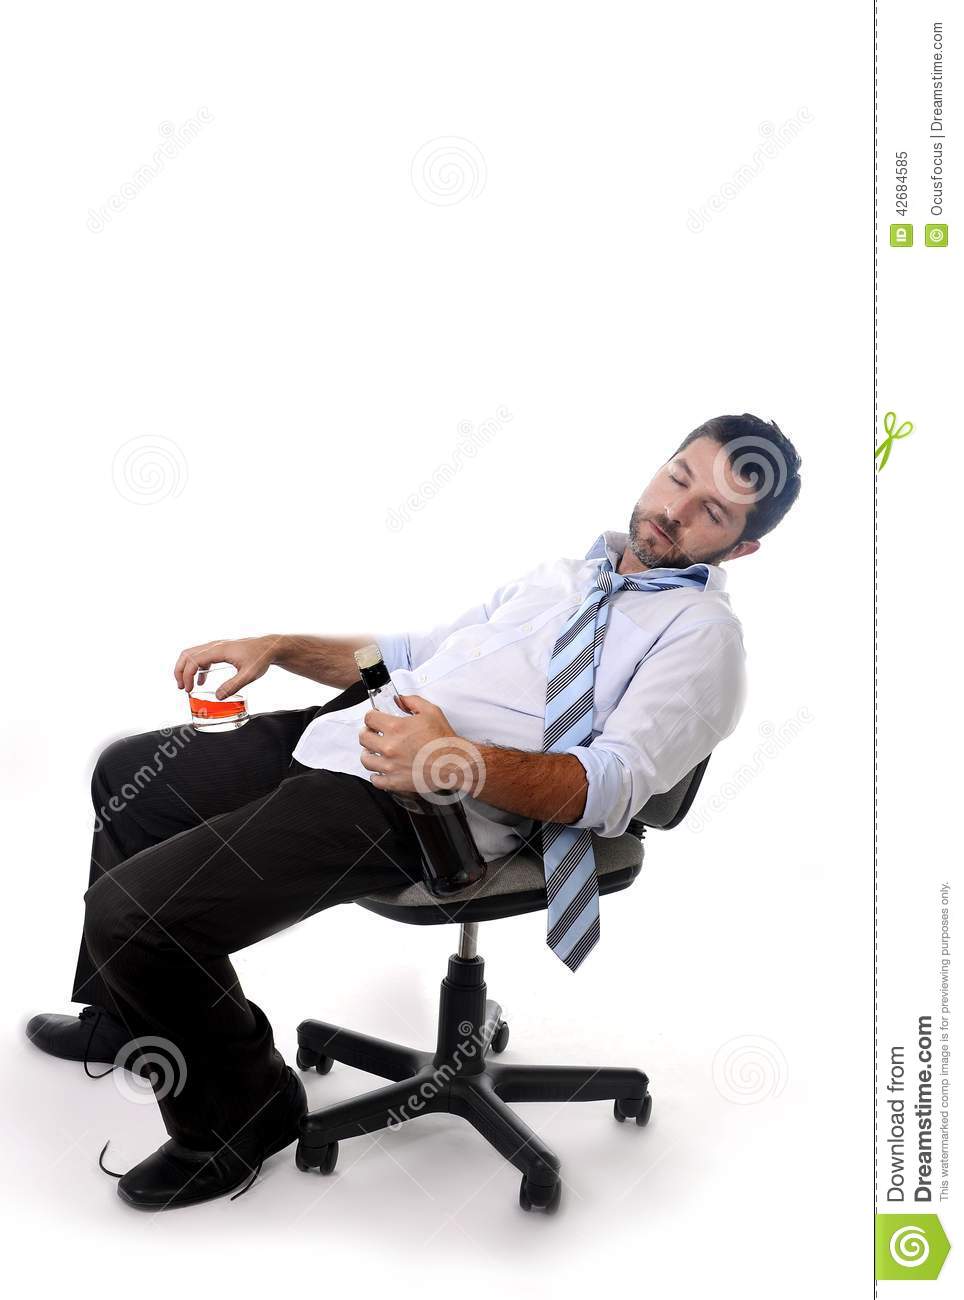 leaning back in chair